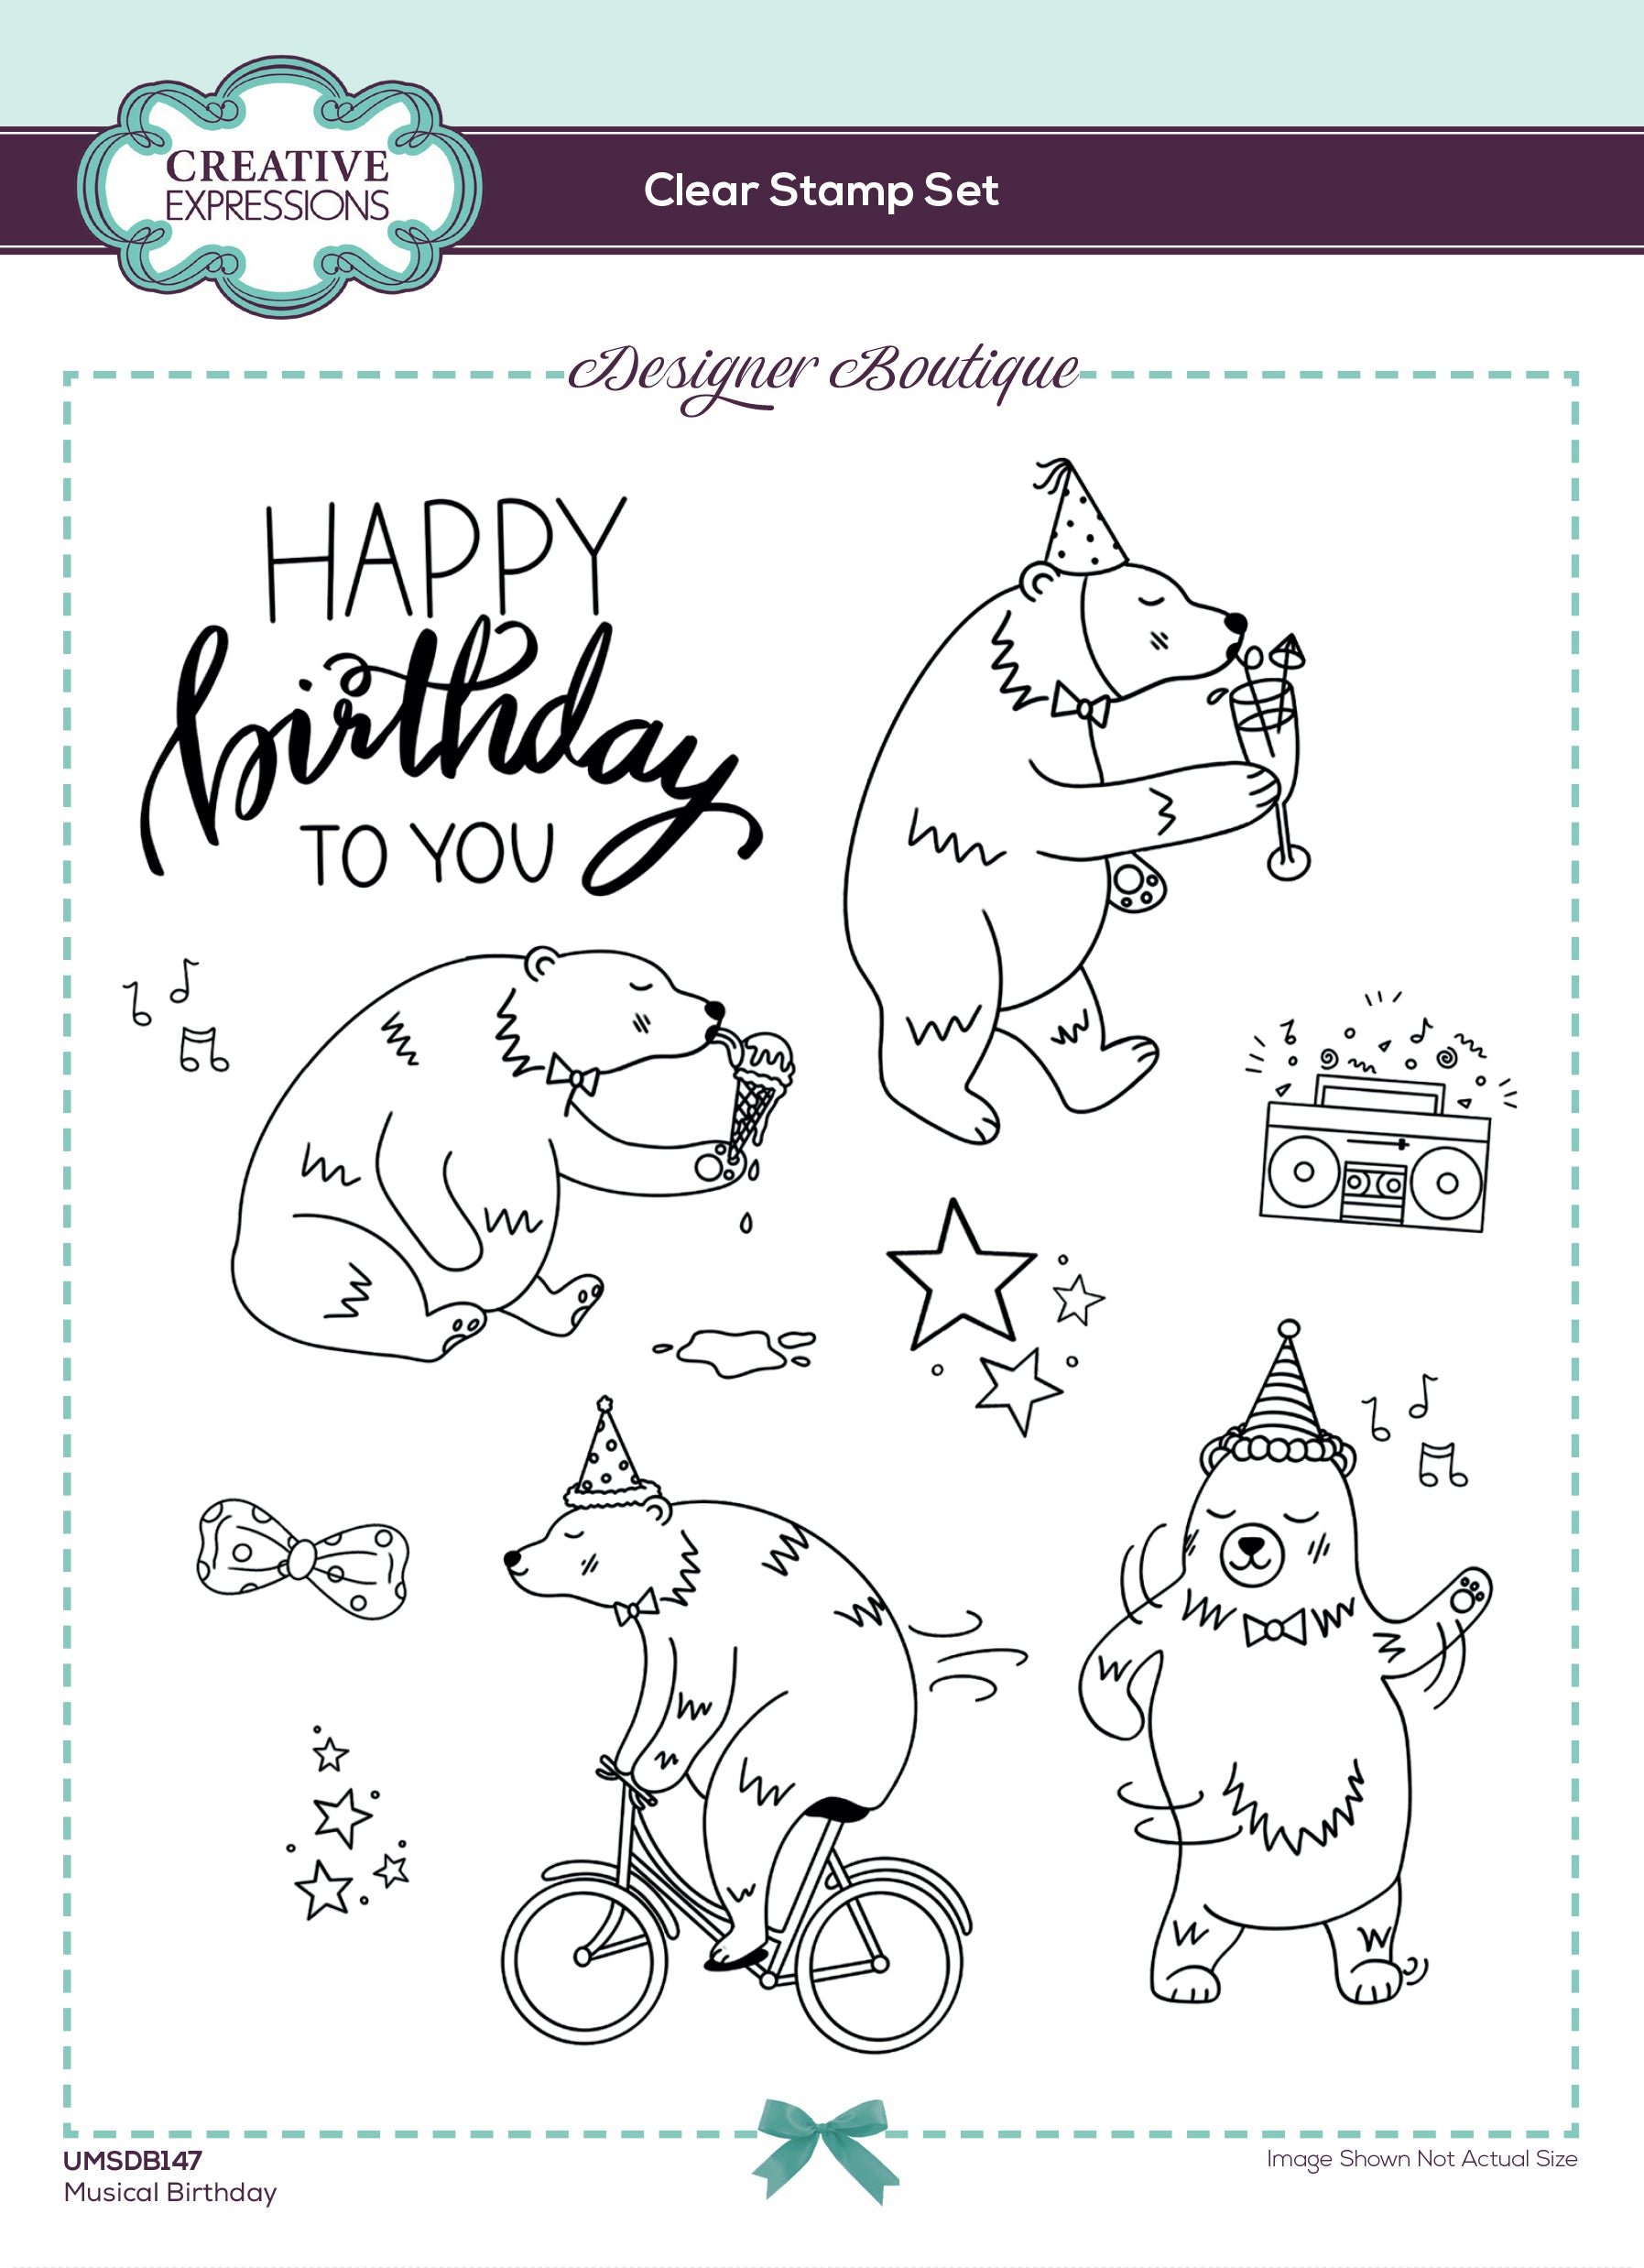 Creative Expressions Designer Boutique Musical Birthday 6 in x 8 in Stamp Set